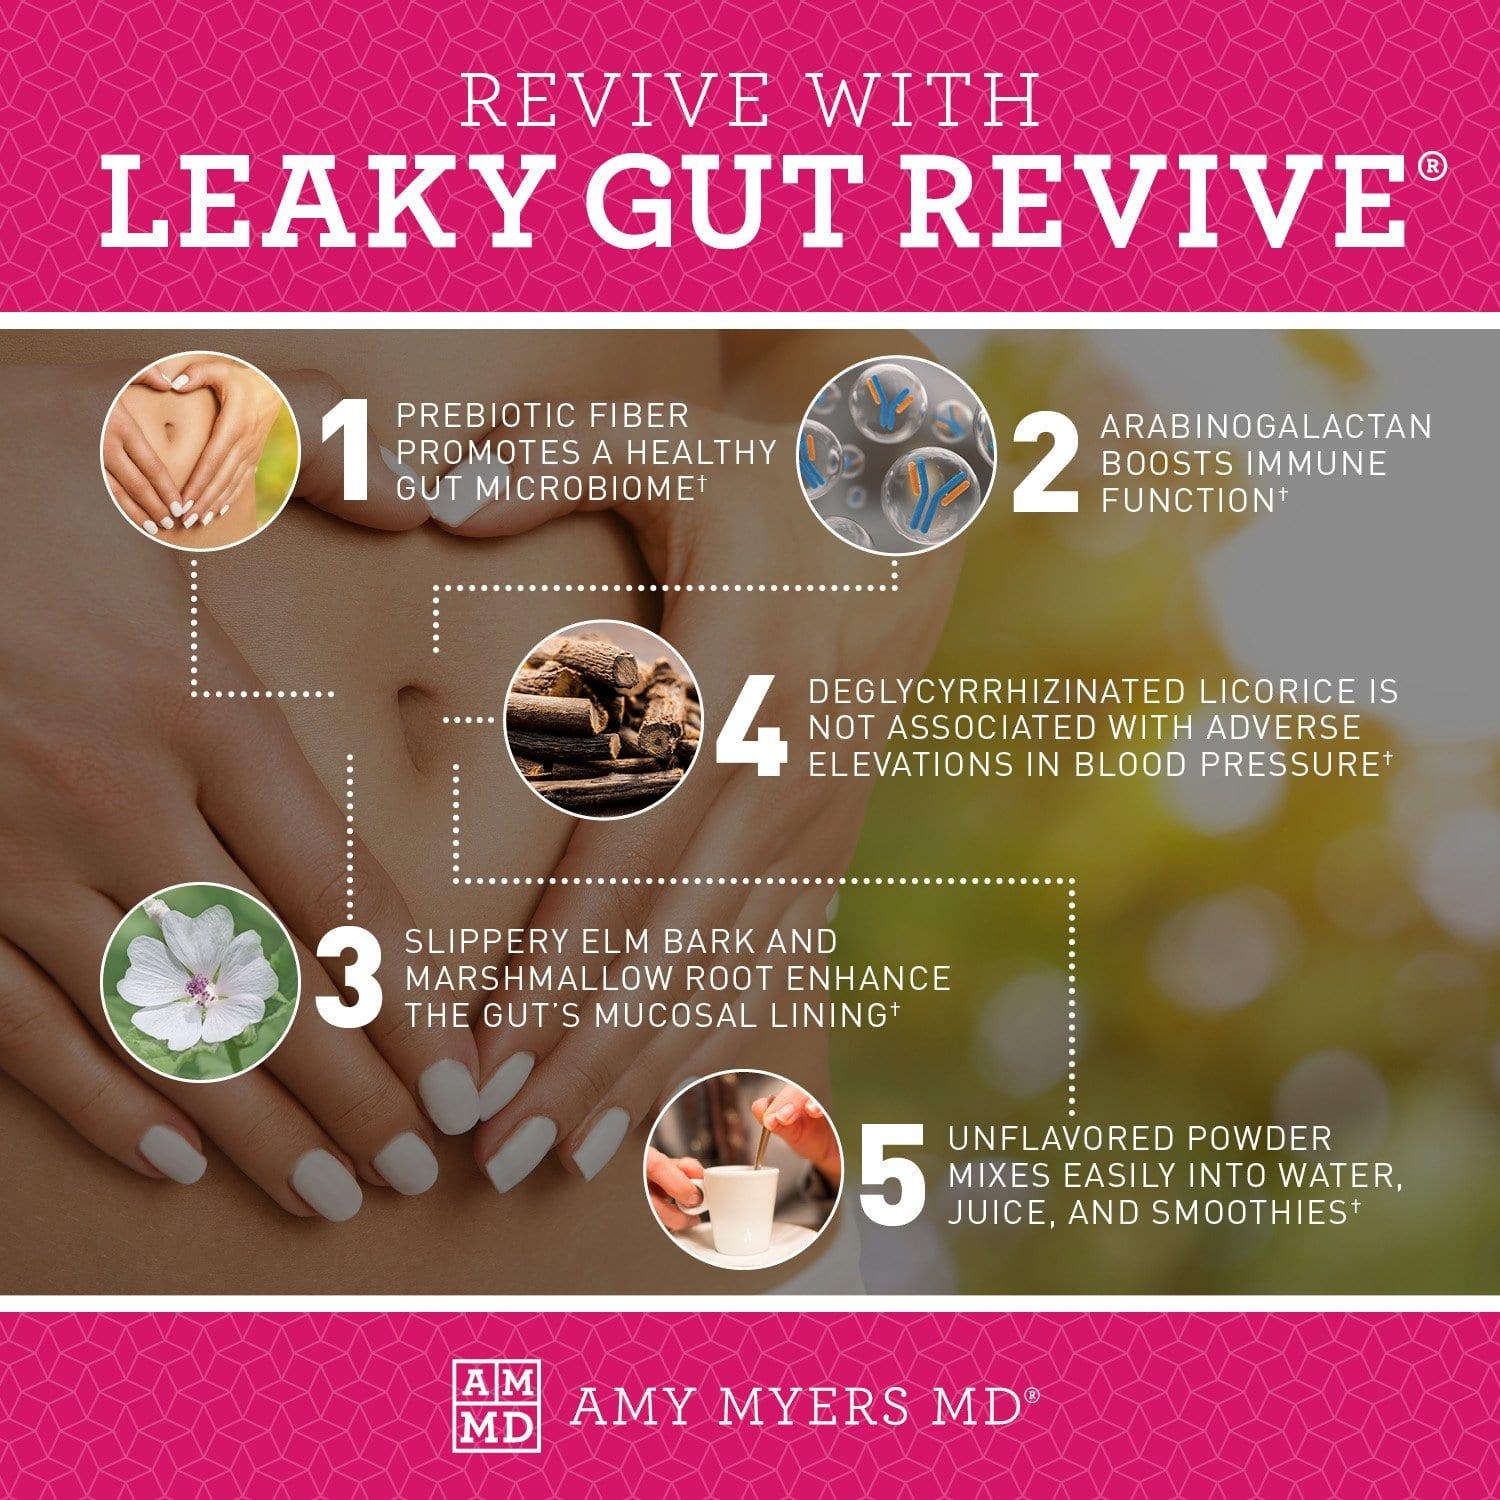 5 ways you can revive with Leaky Gut Revive® - Infographic - Amy Myers MD®